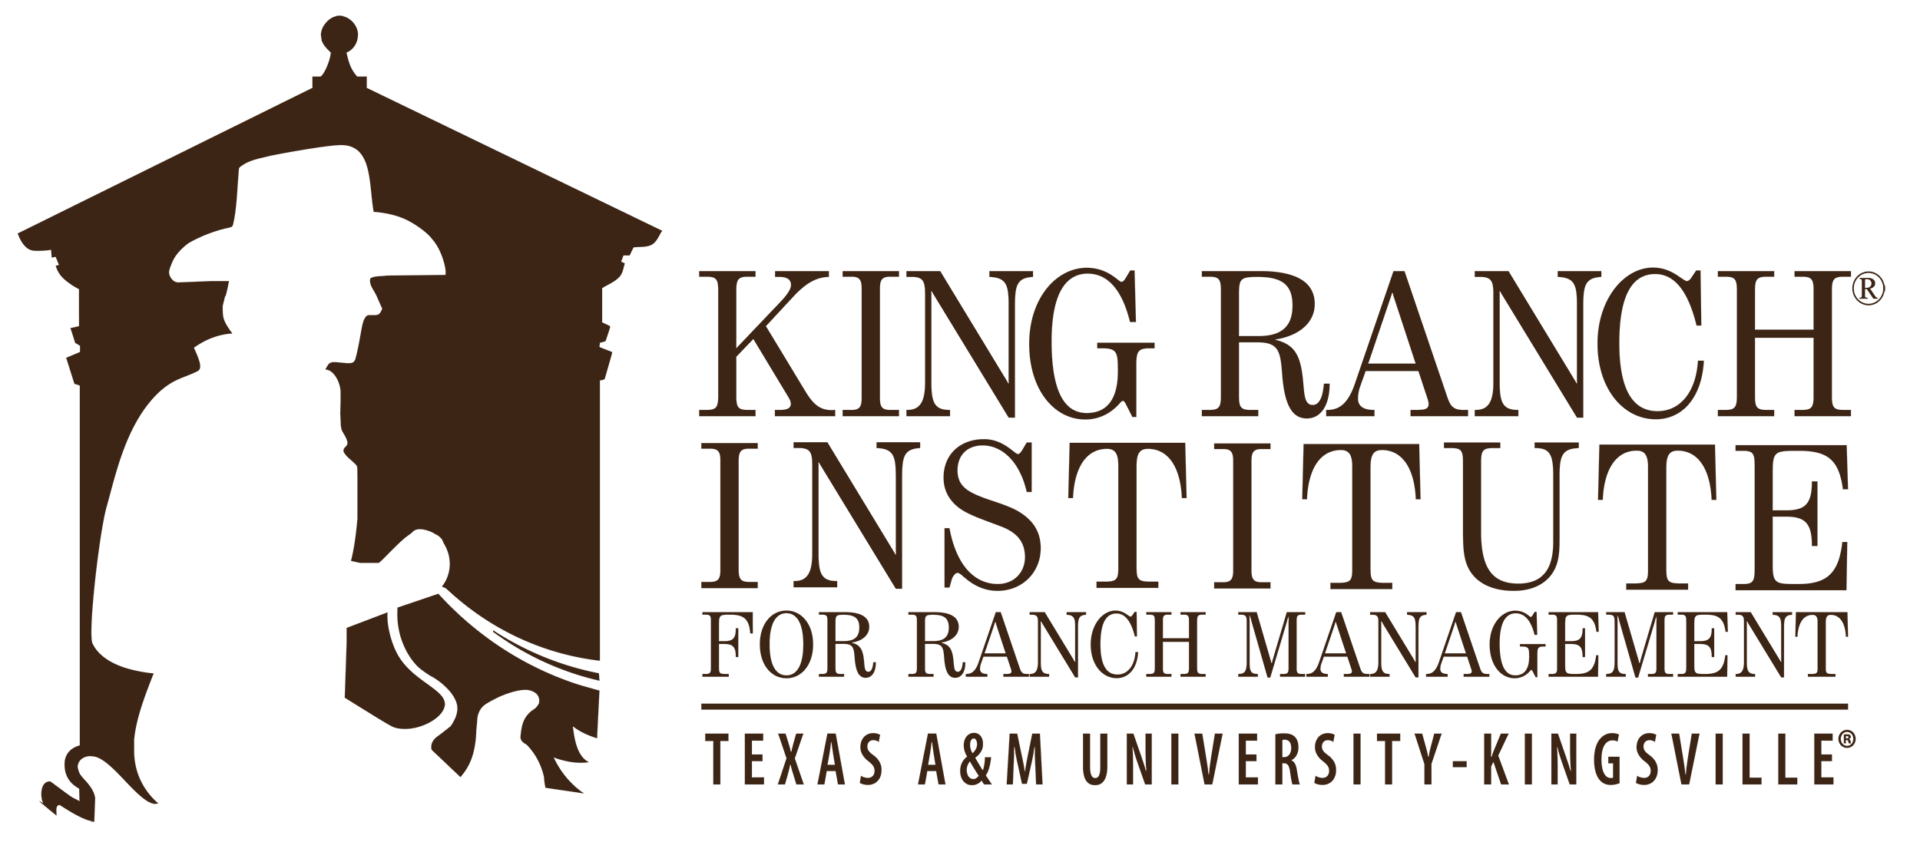 Lee Leachman - King Ranch Institute for Ranch Management